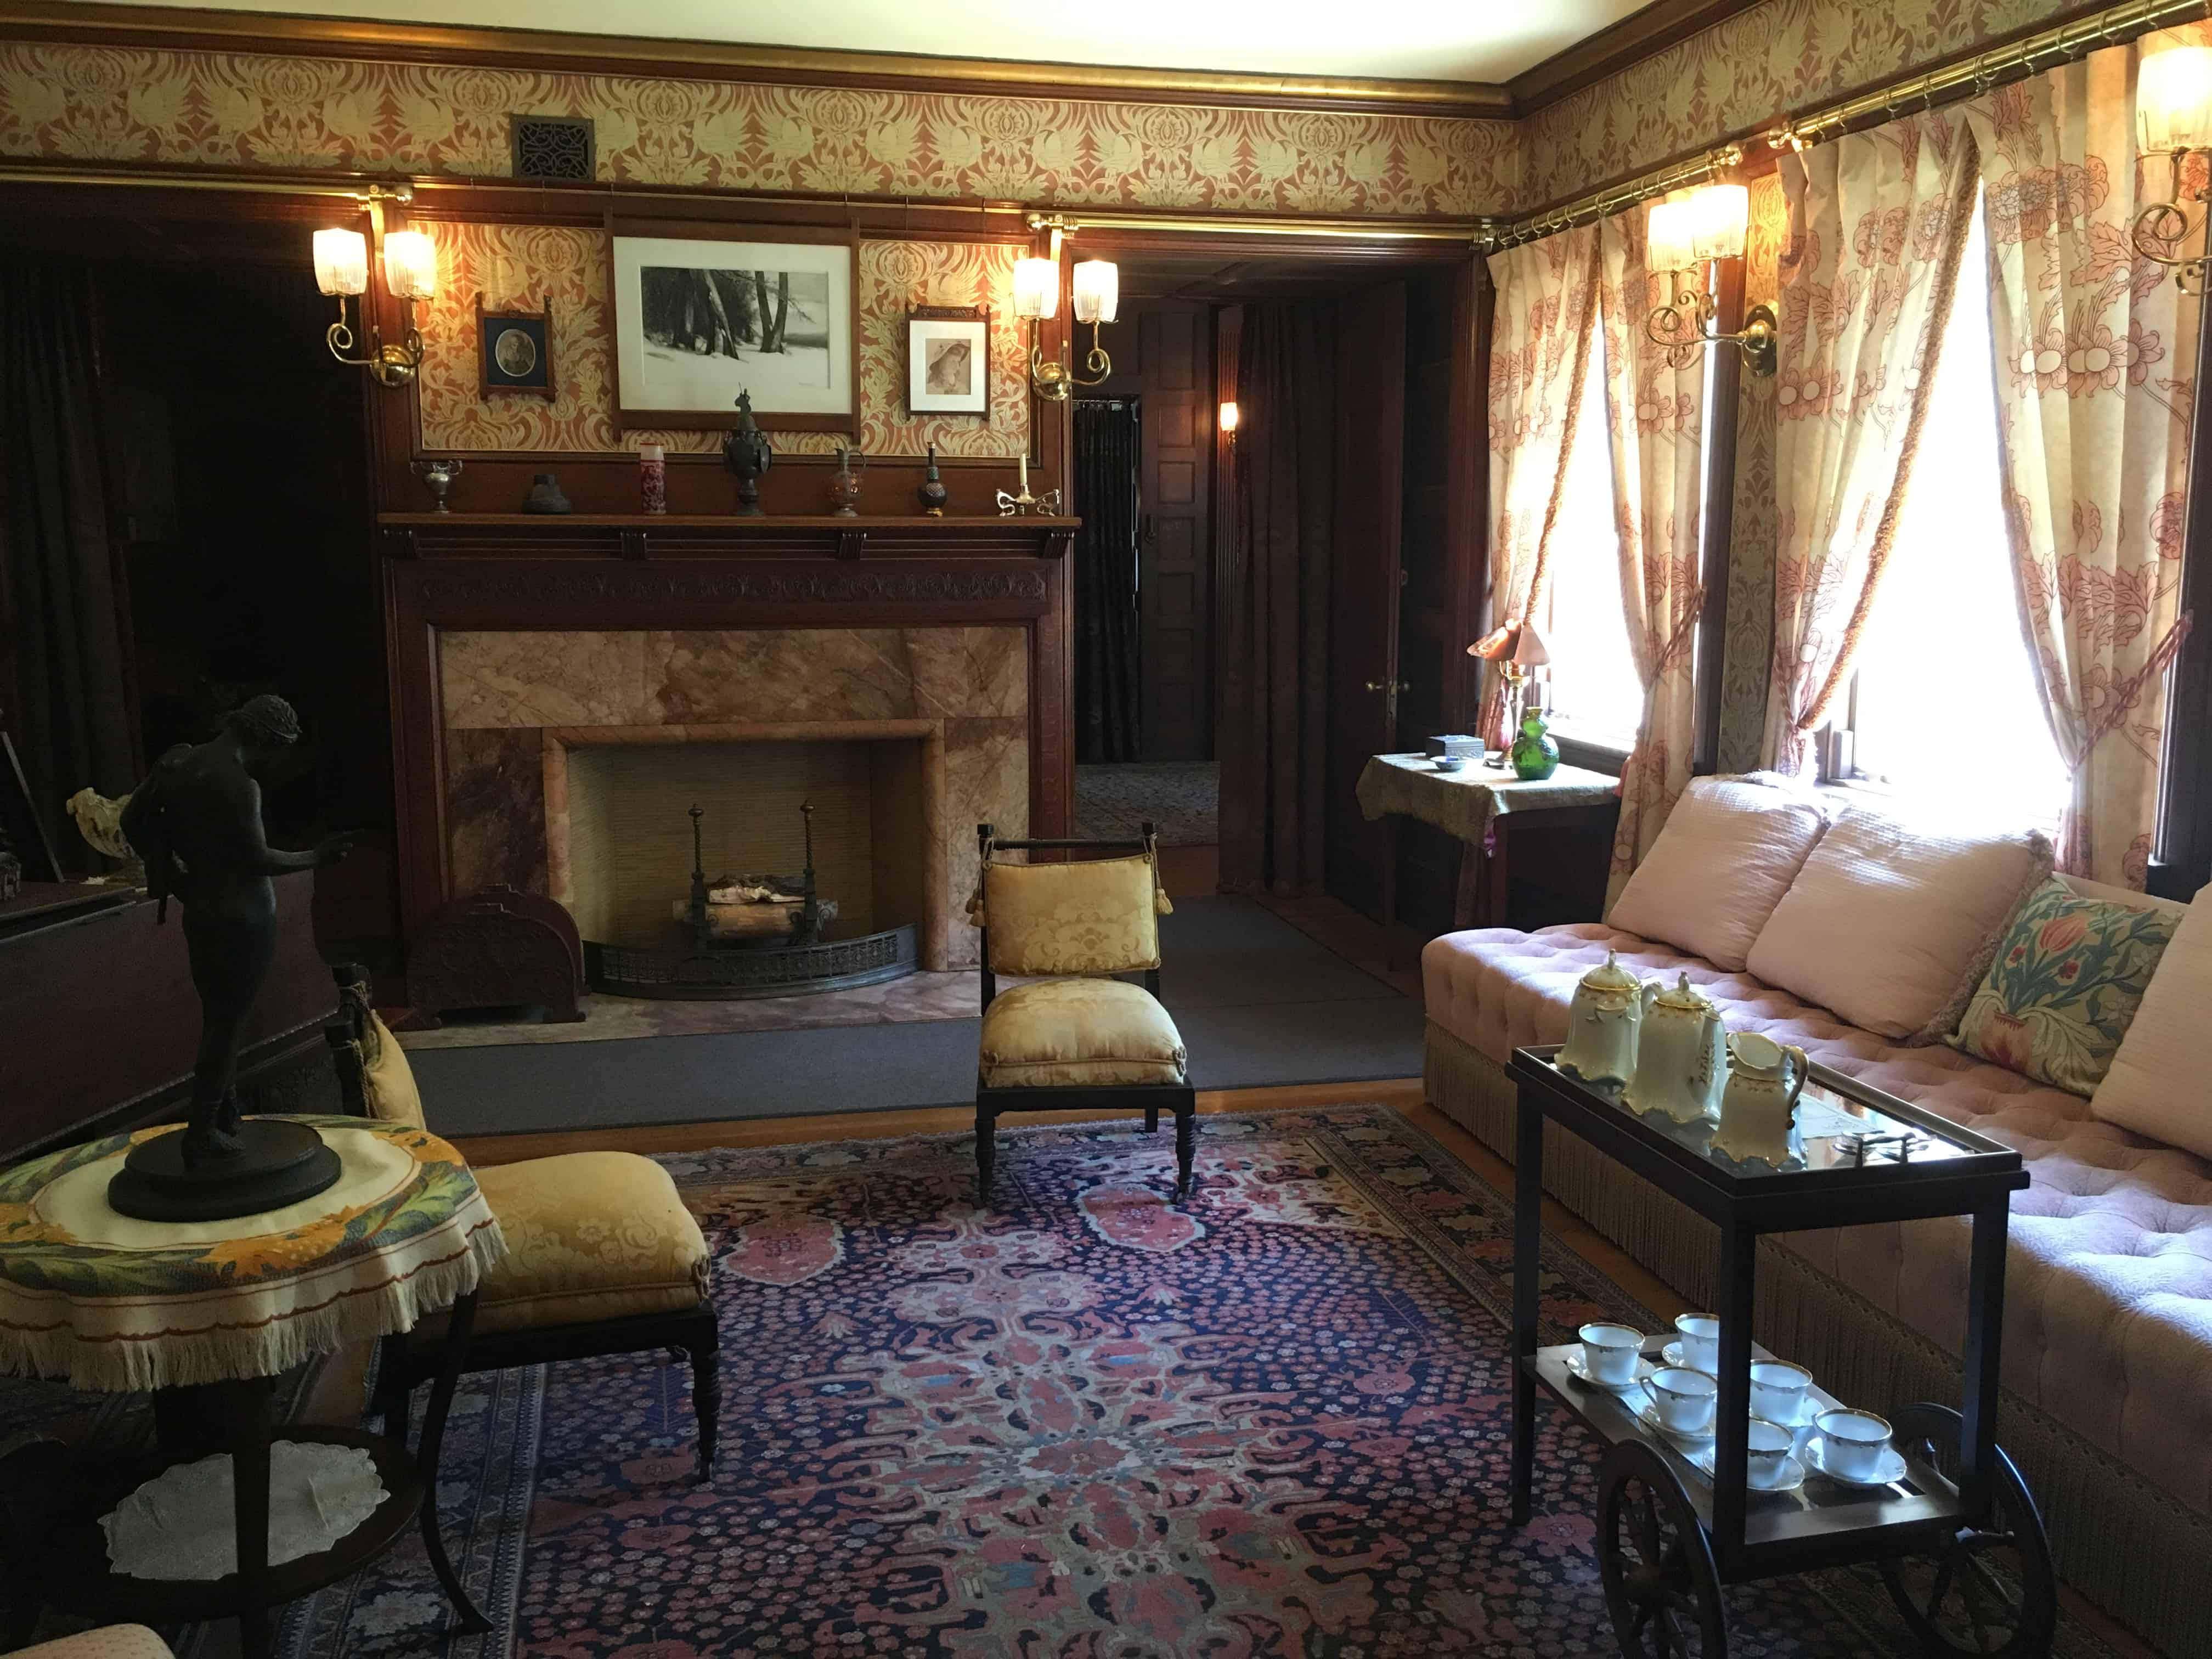 Parlor at the John J. Glessner House in Chicago, Illinois